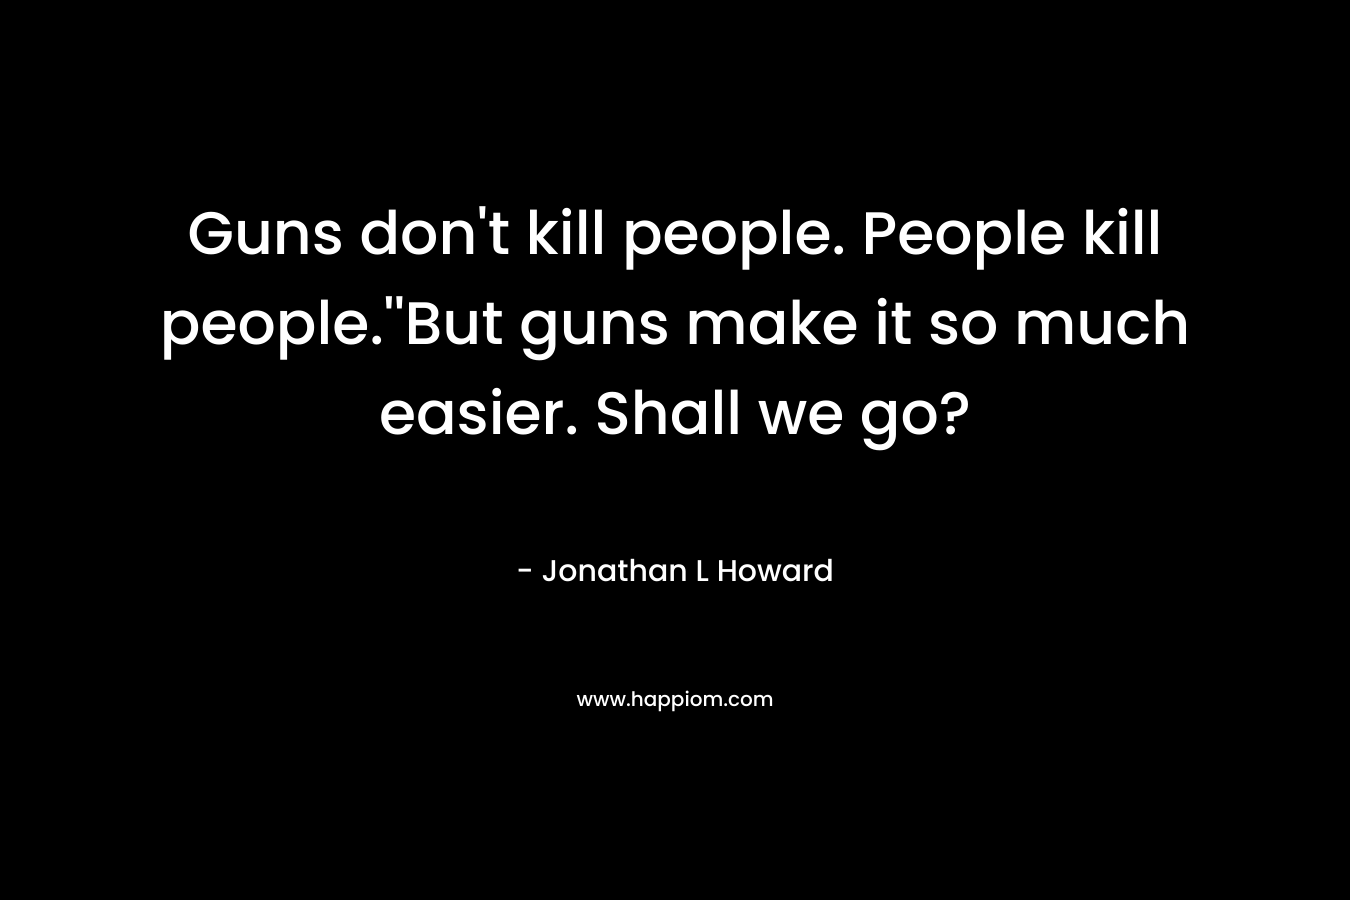 Guns don't kill people. People kill people.''But guns make it so much easier. Shall we go?